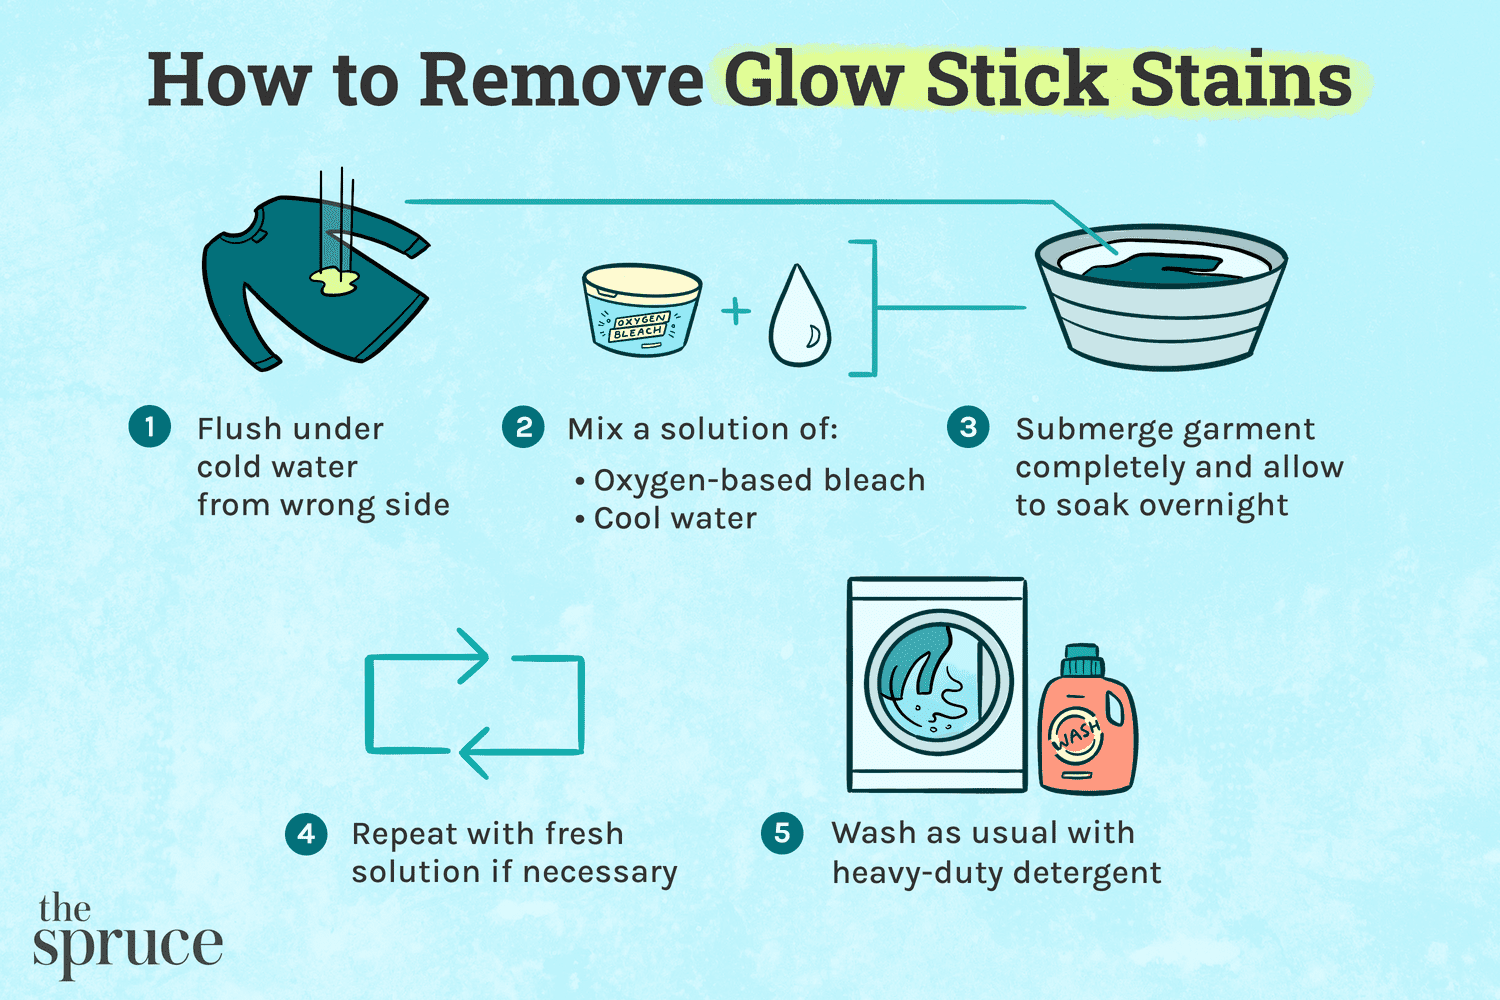 How to Get Glow Stick Stains Out of Clothes